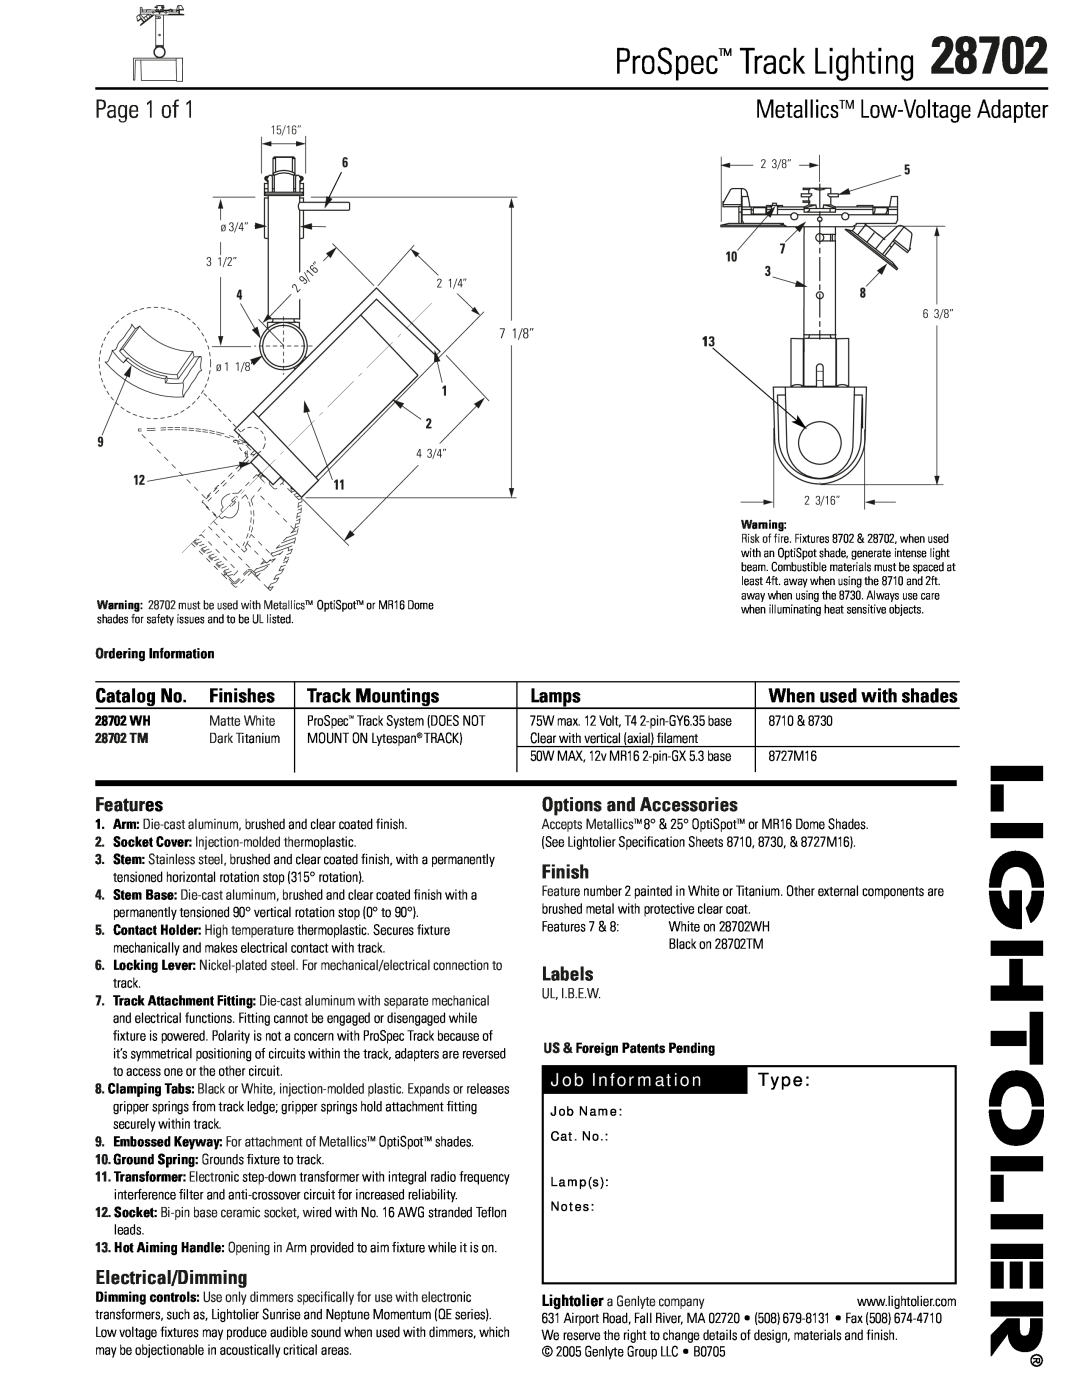 Lightolier 28702 specifications ProSpec Track Lighting, Page 1 of, MetallicsTM Low-VoltageAdapter, Catalog No, Finishes 